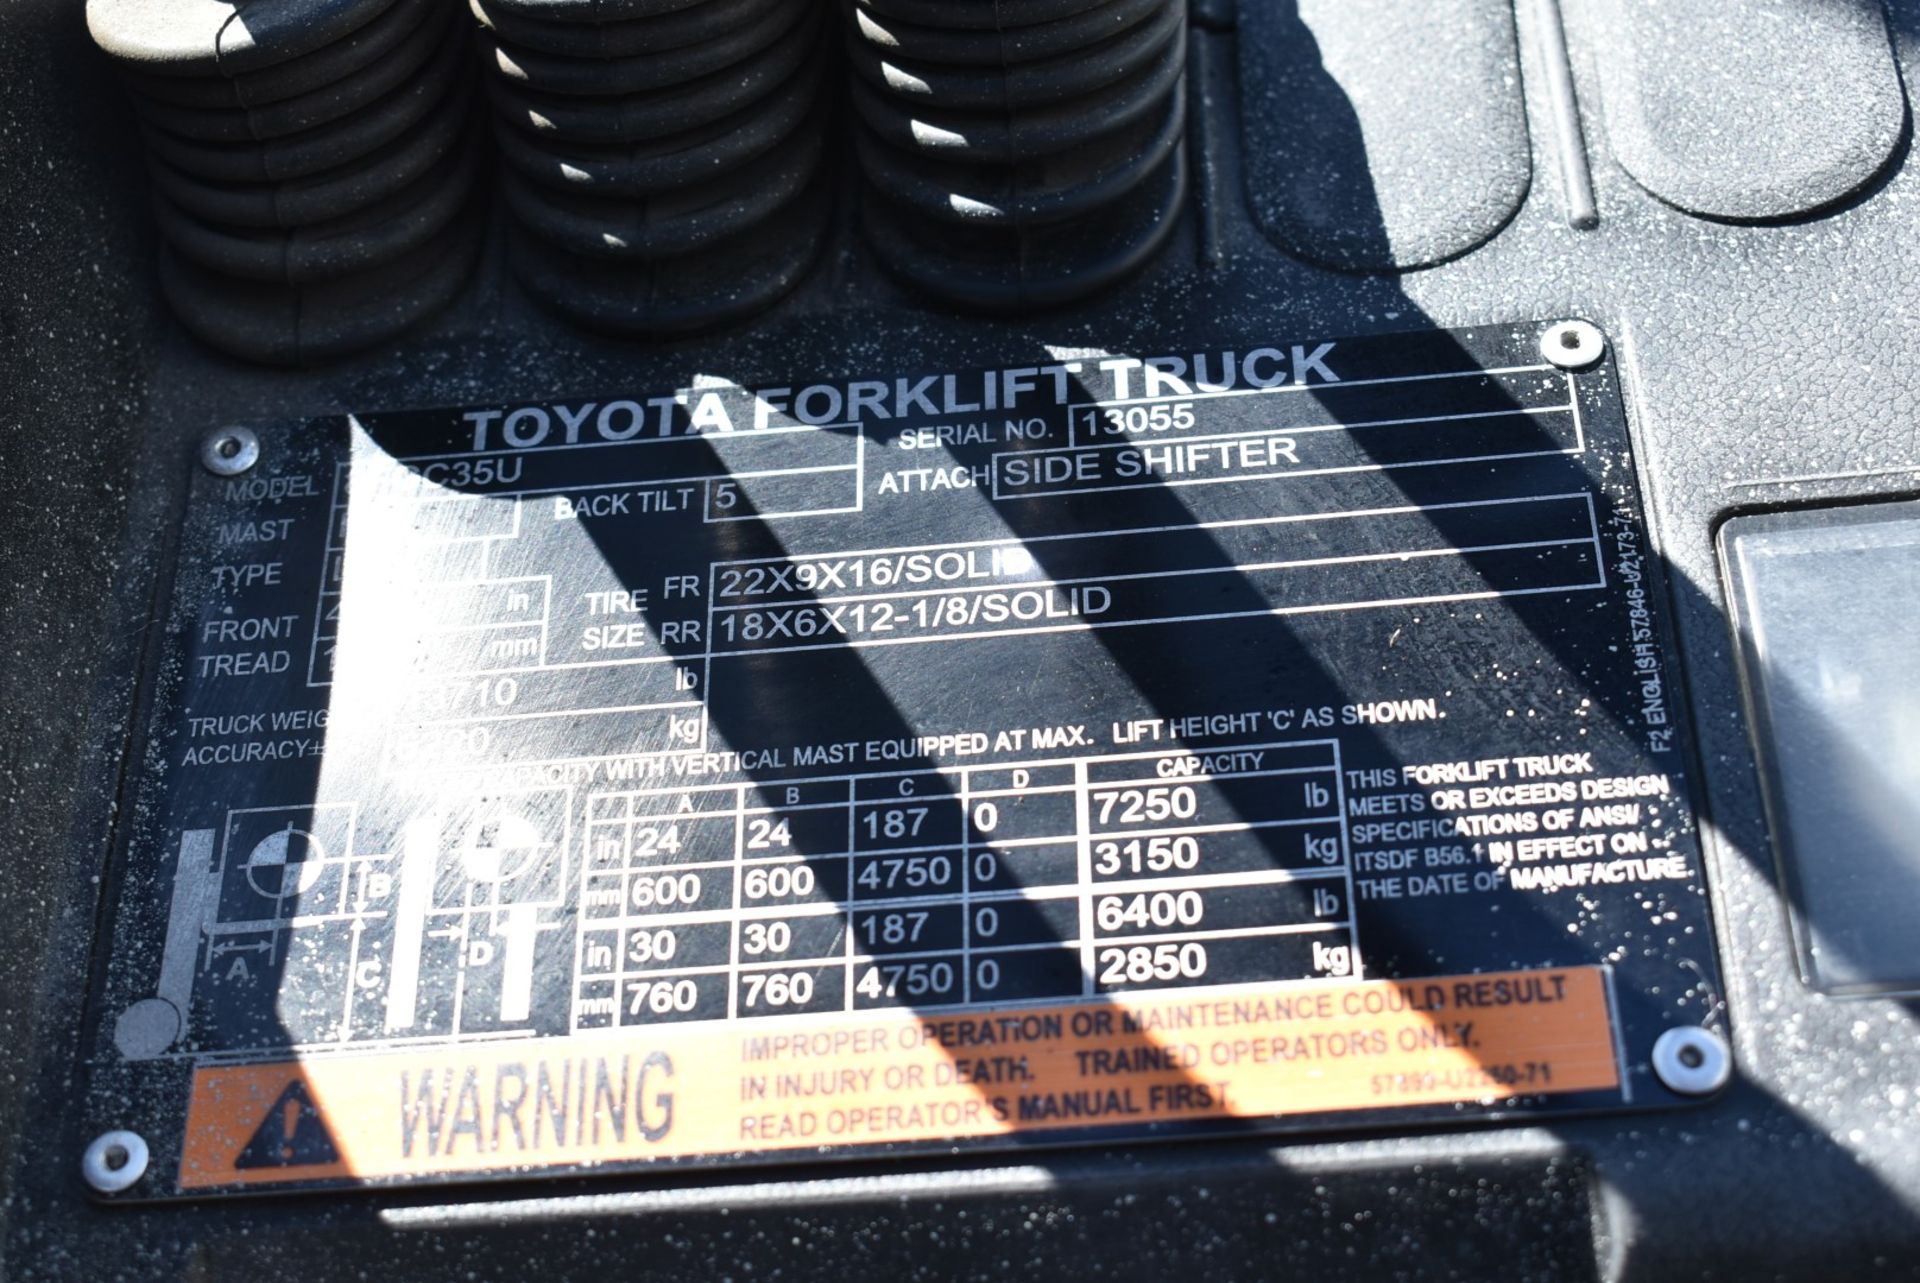 TOYOTA (2018) GC35U LPG FORKLIFT WITH 7250 LBS MAX CAPACITY, 187" 3-STAGE HIGH VISIBILITY MAST, - Image 6 of 8